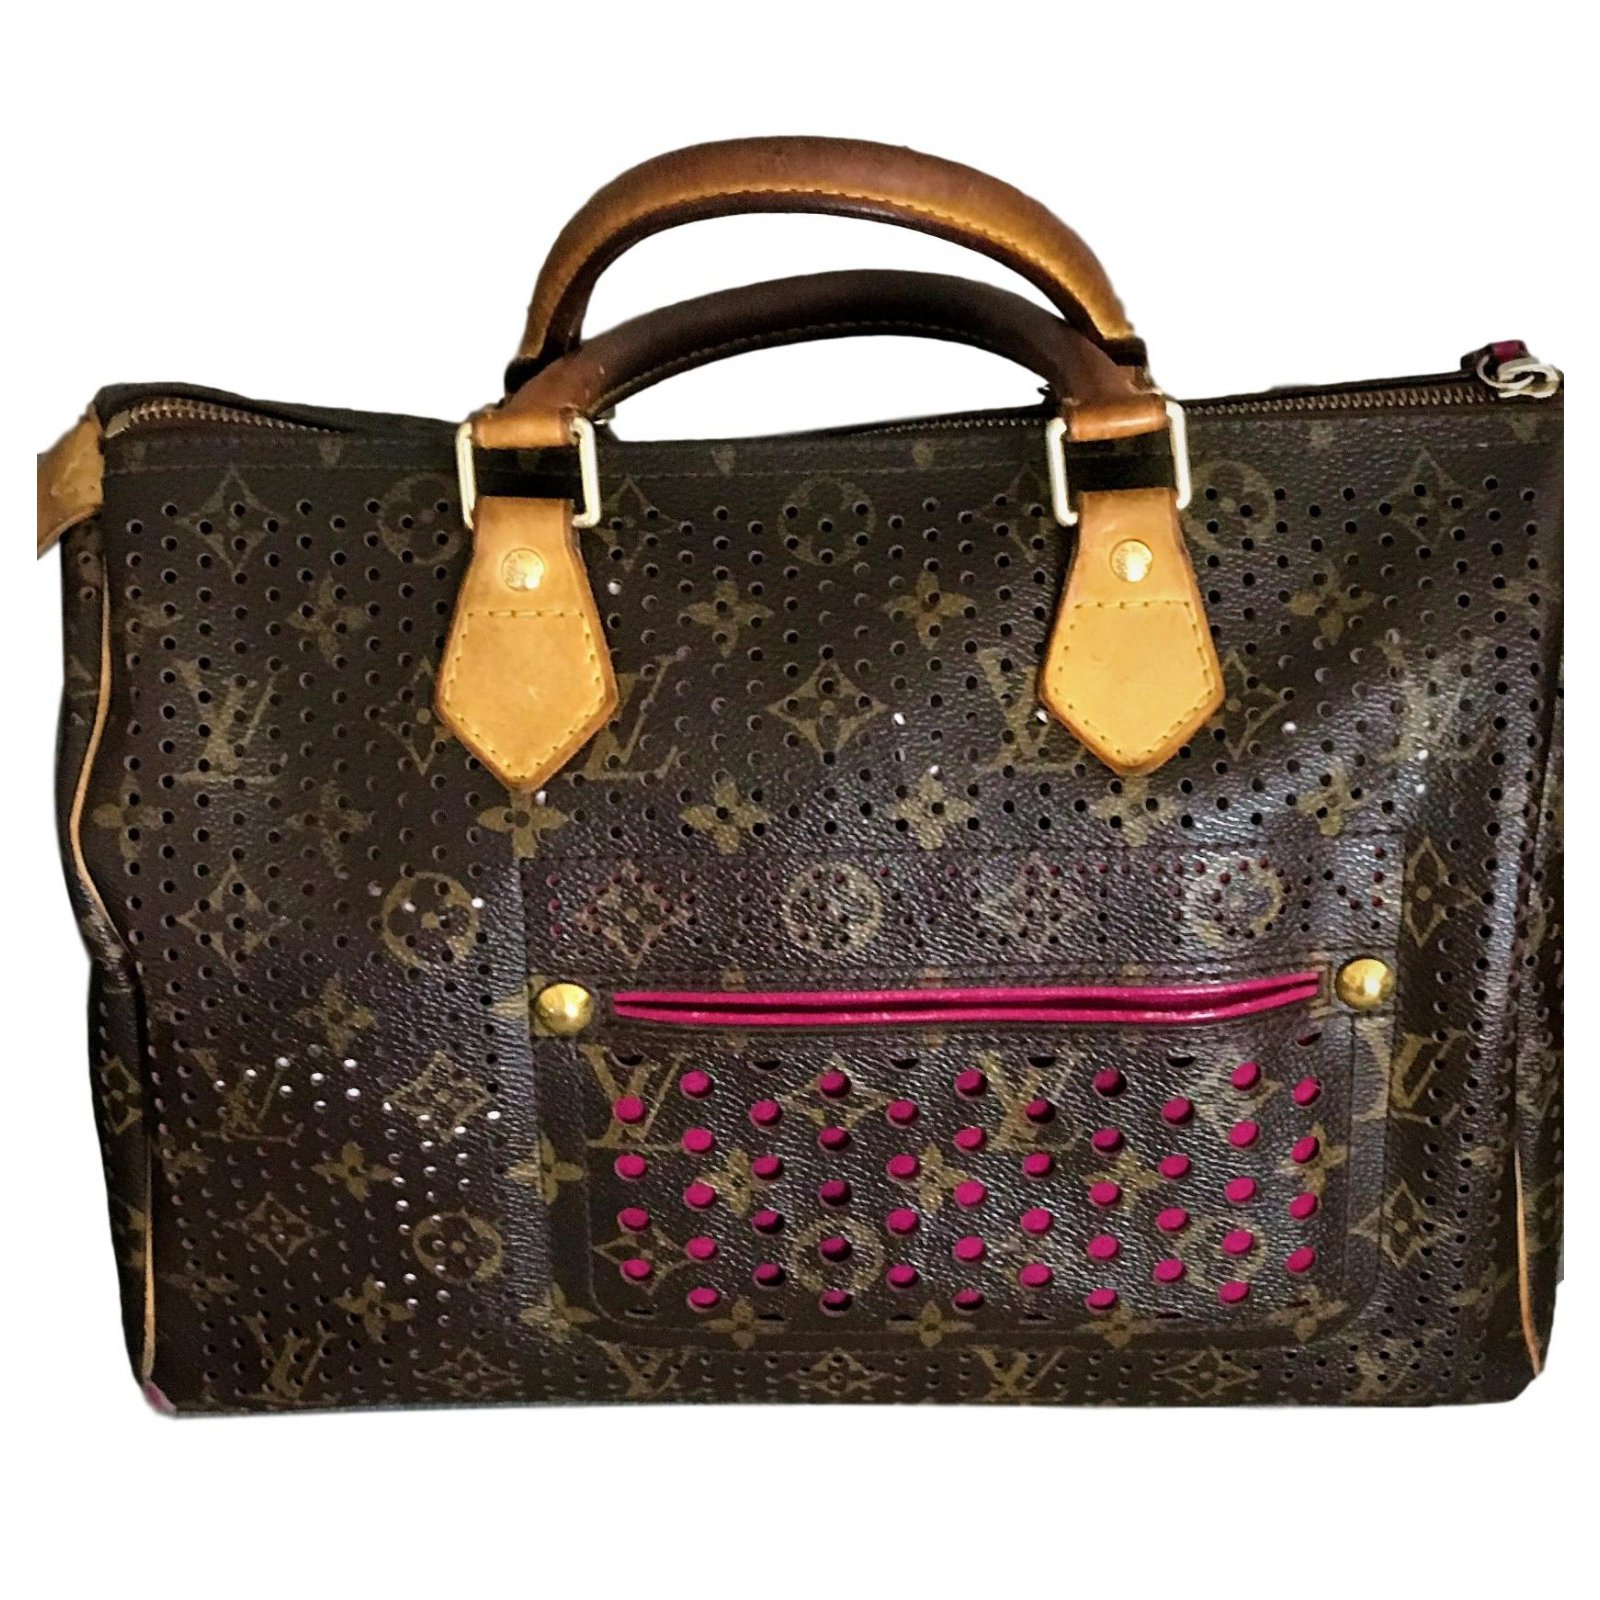 Louis Vuitton Fuchsia Perforated Speedy 30 Bag Limited Edition